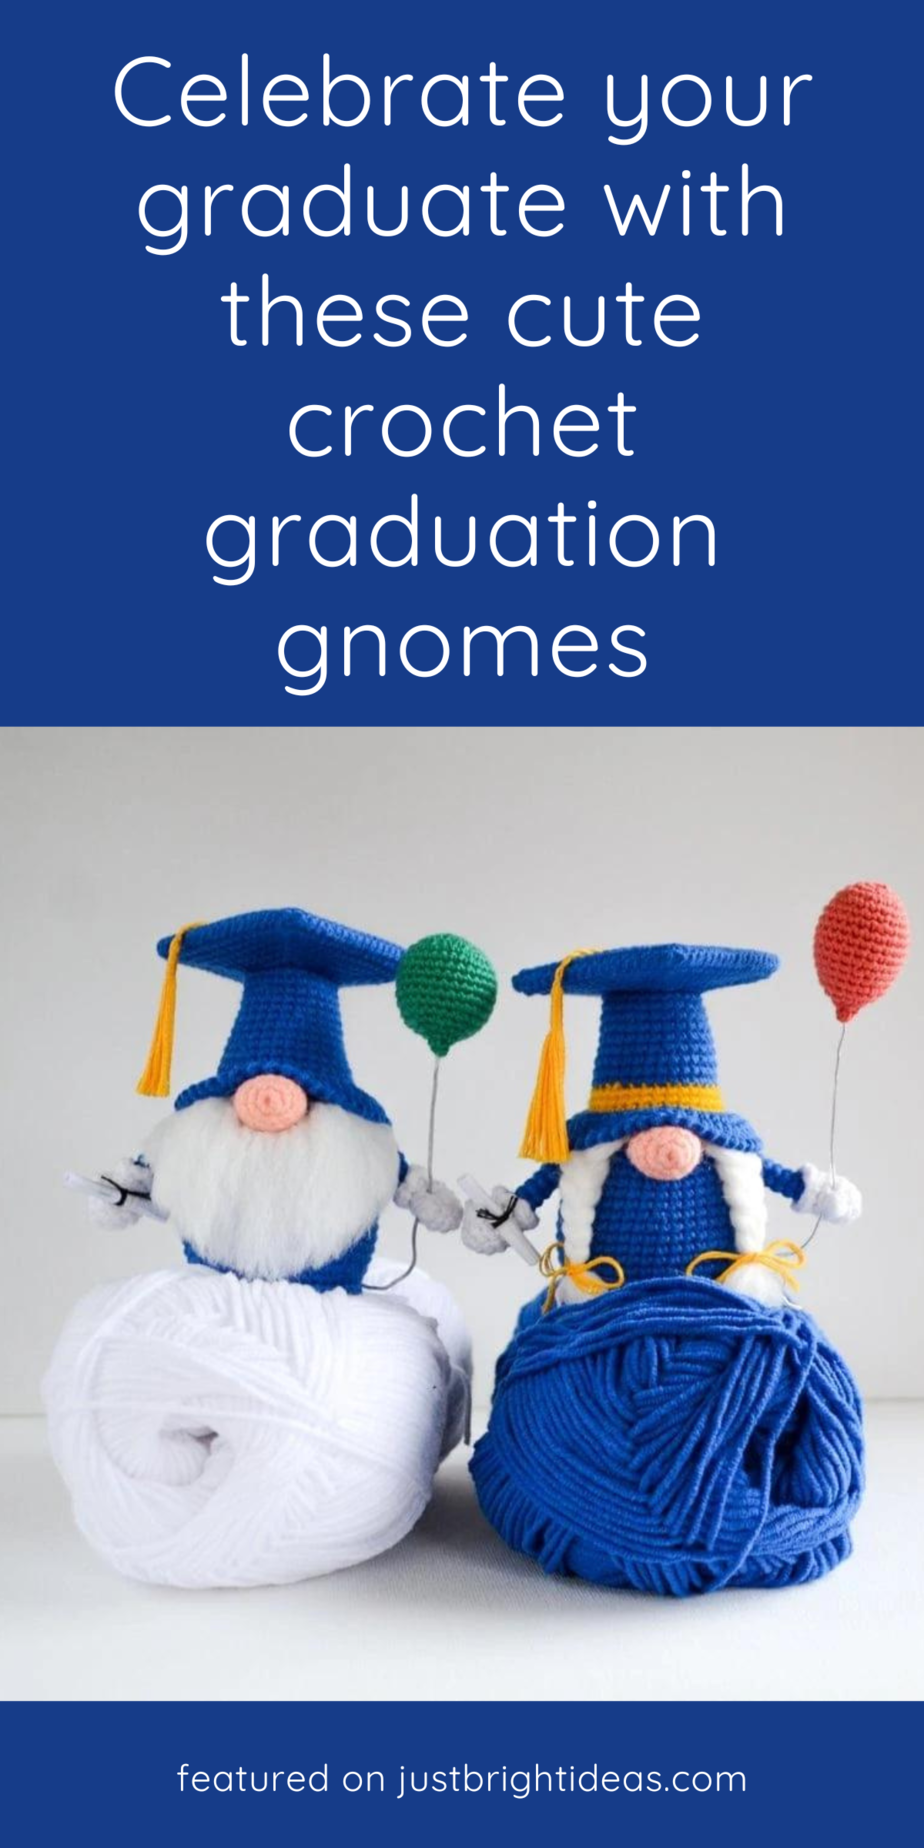 If you're searching for a keepsake gift you can crochet for your graduate look no further! These sweet scandi gnomes are perfect, especially if you work them up in their school colors!